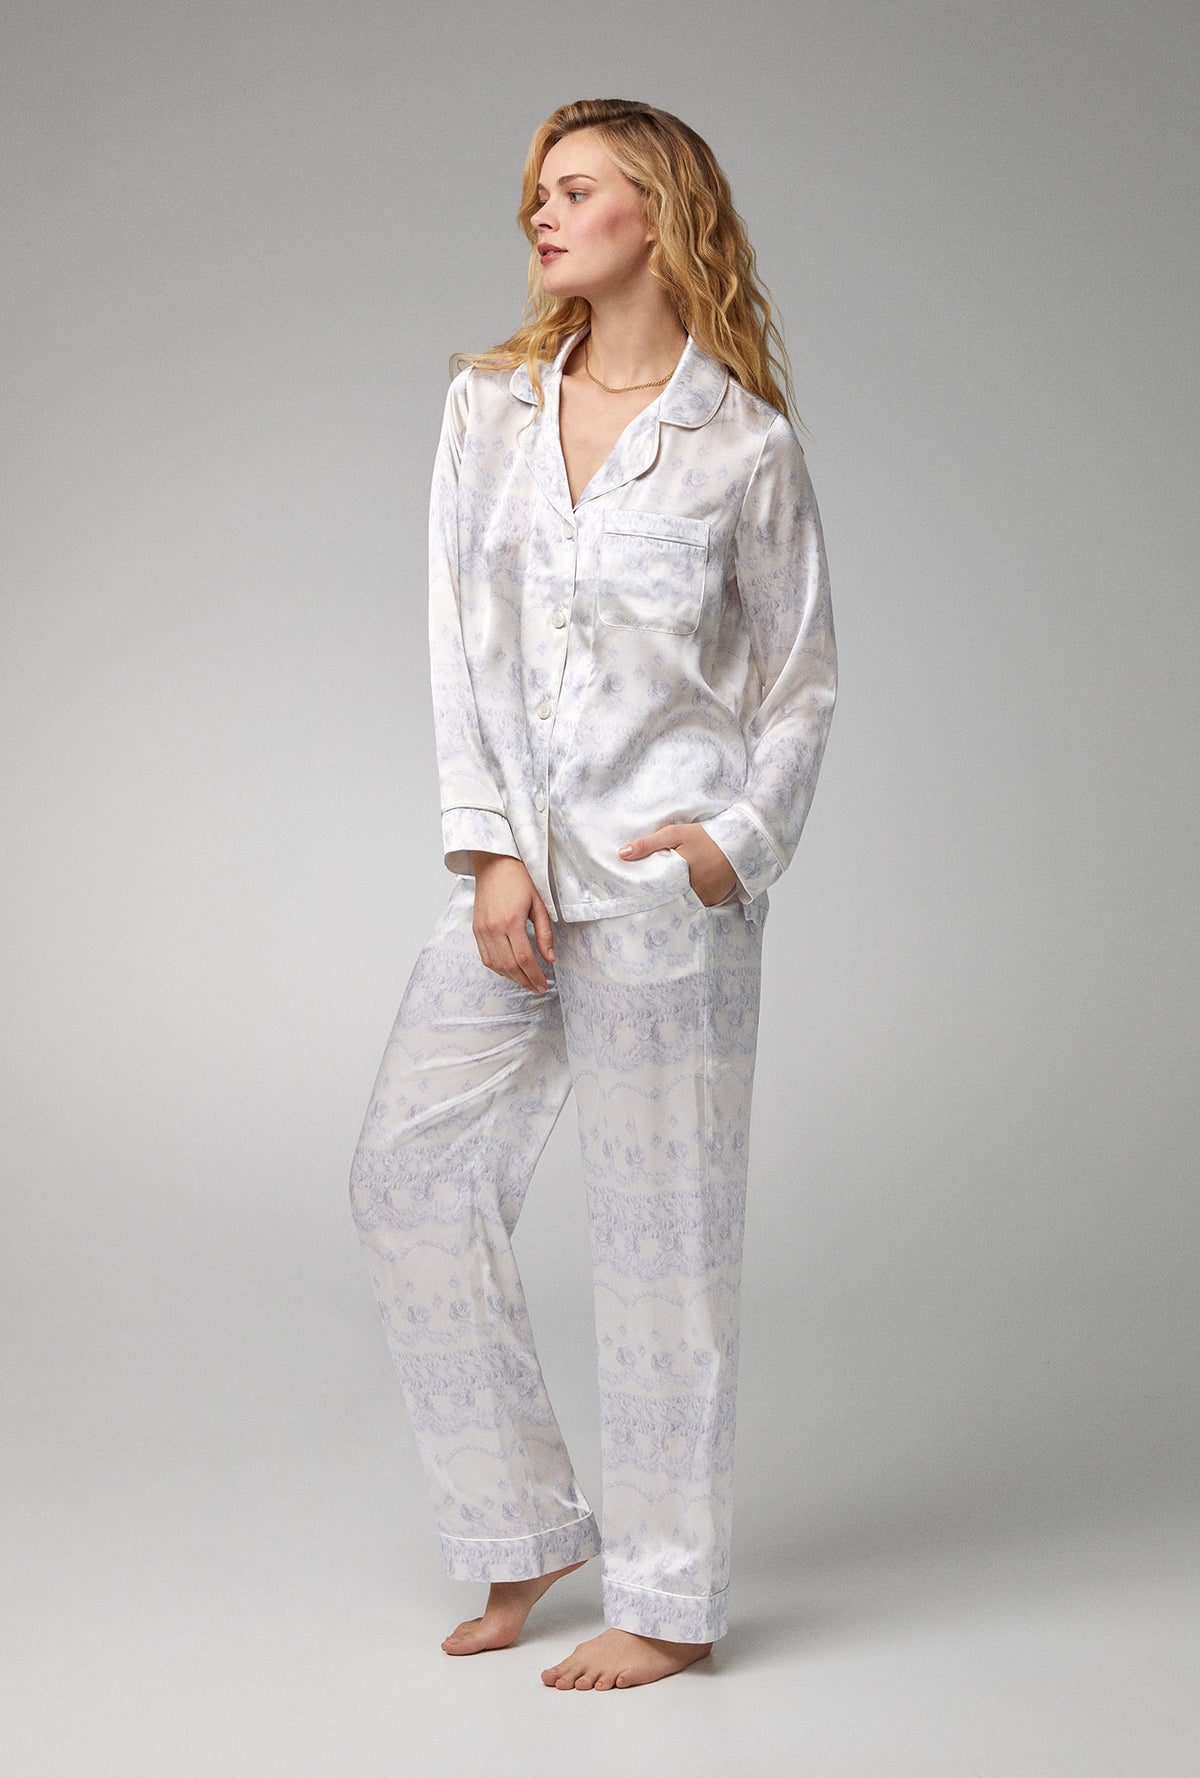 A lady wearing white long sleeve classic woven silk satin pj set with buttercream print